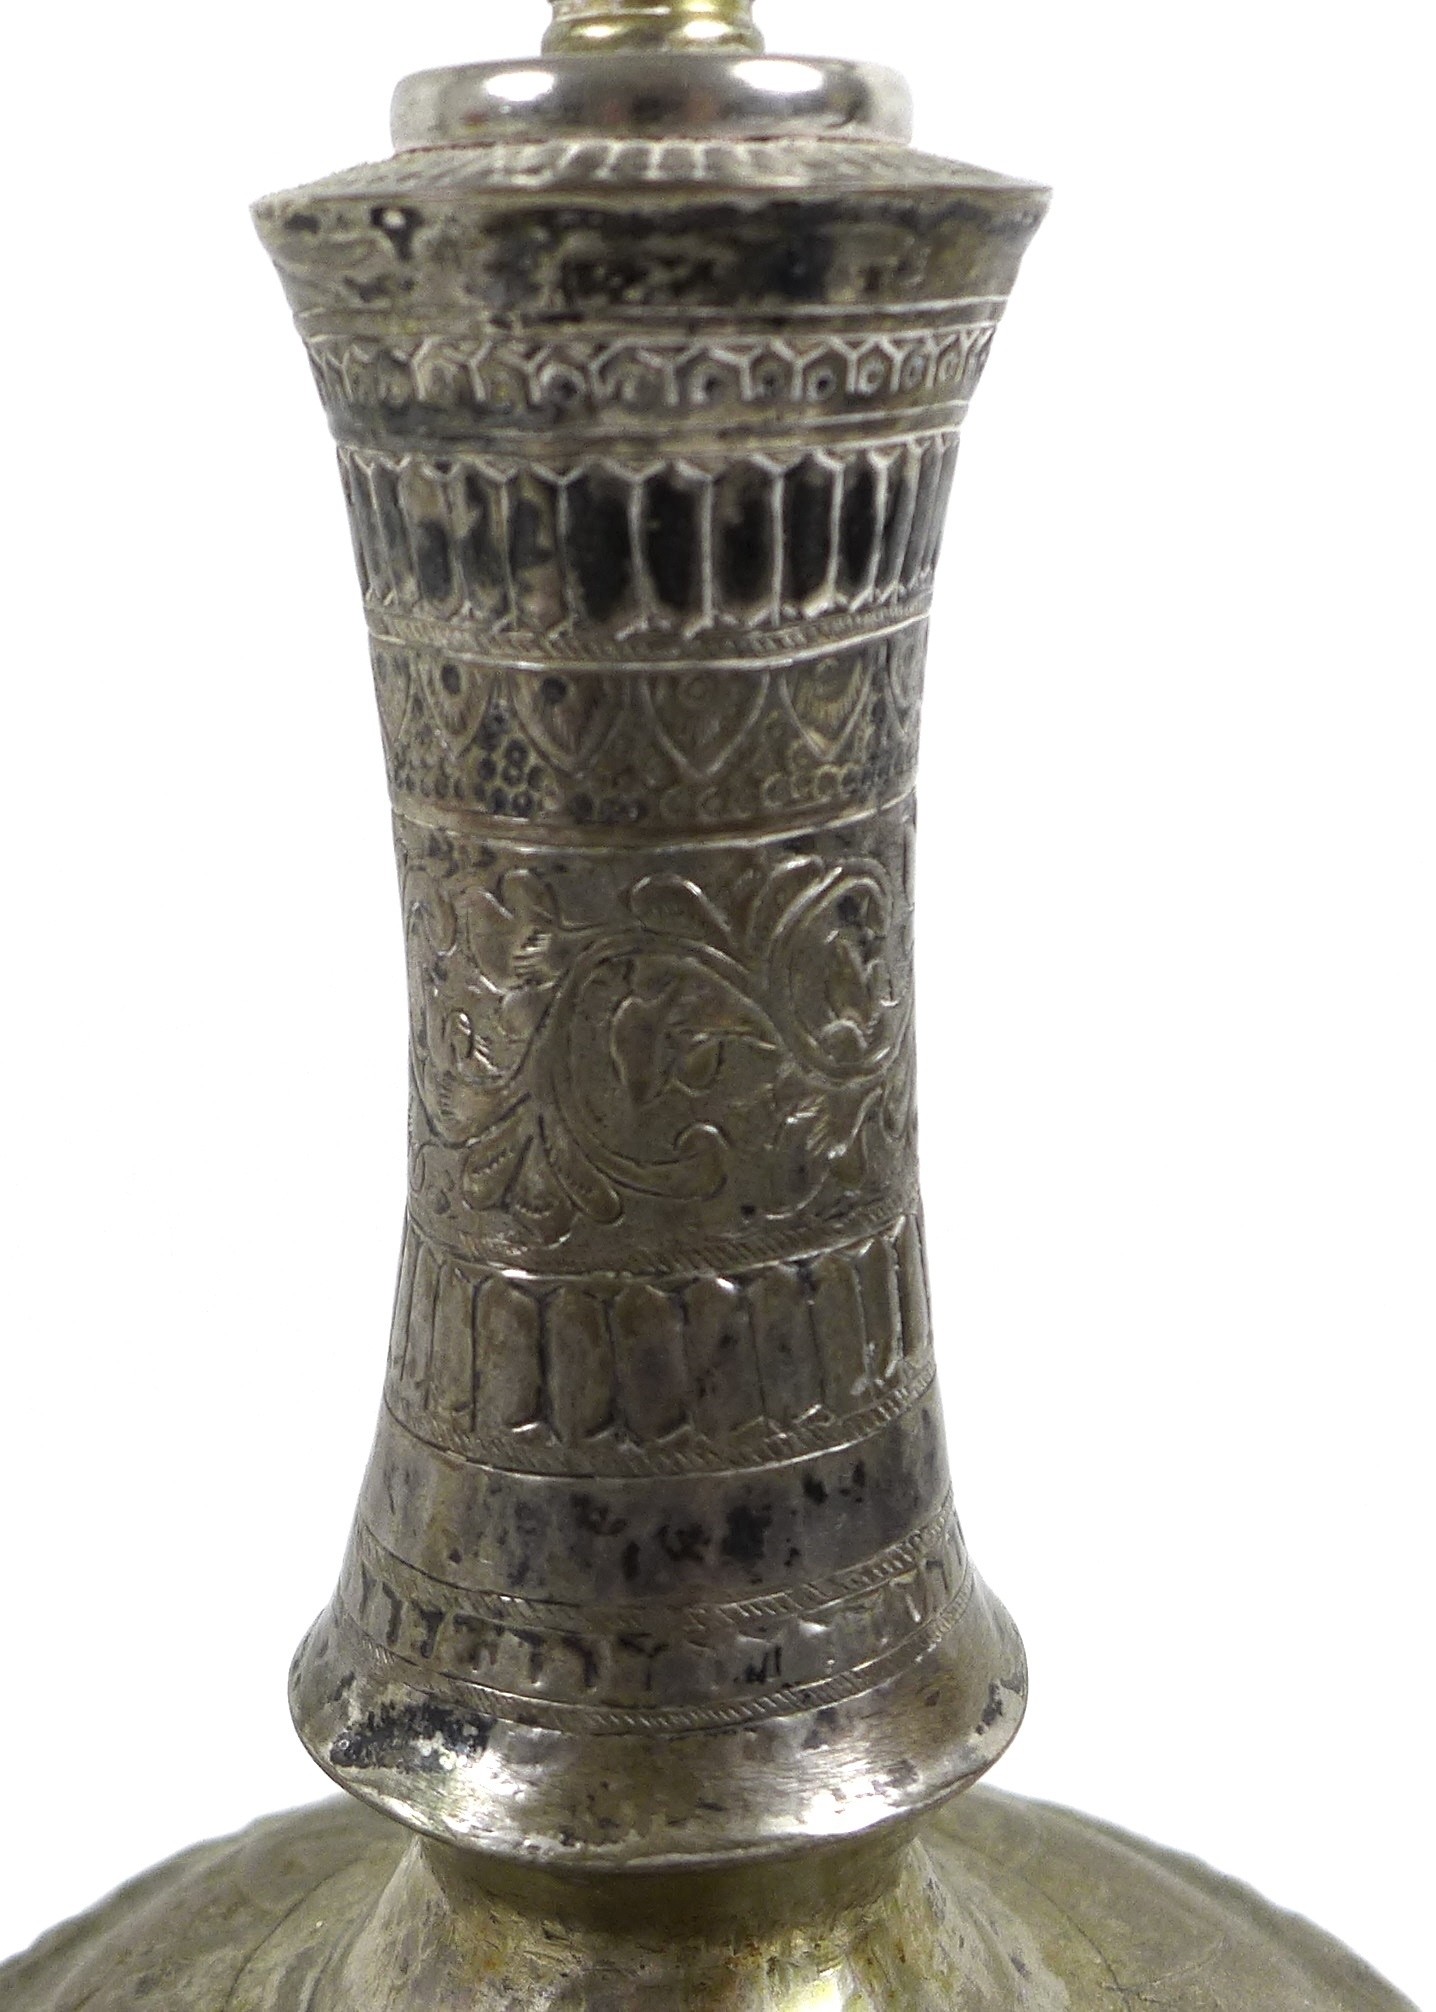 A white metal or brass silvered bottle vase, likely 19th century Indian the gourd form base - Image 3 of 5